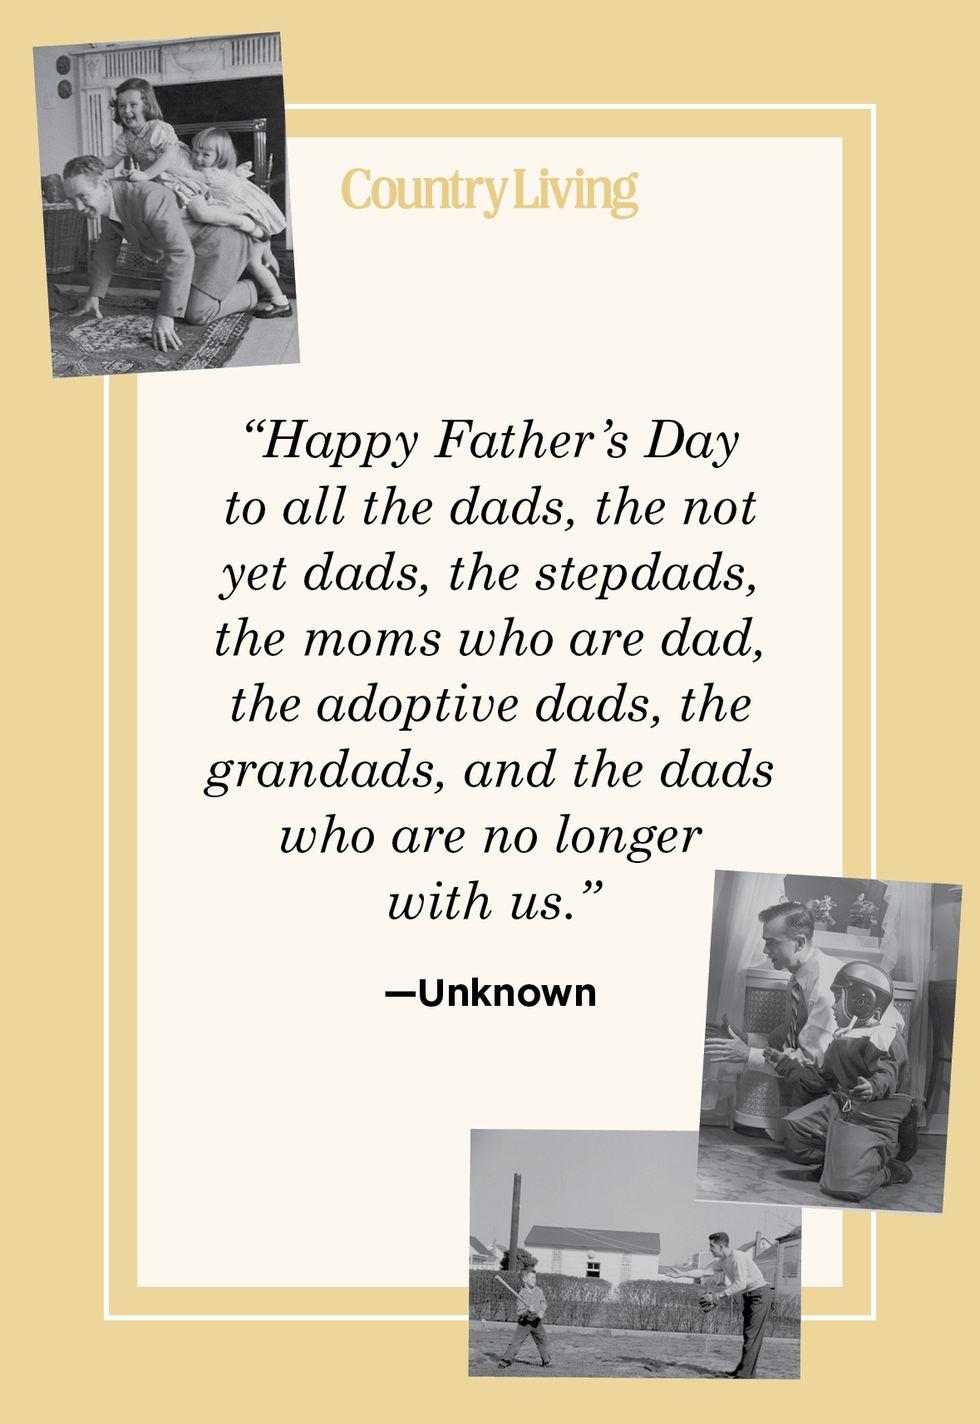 happy father's day quote for all dads